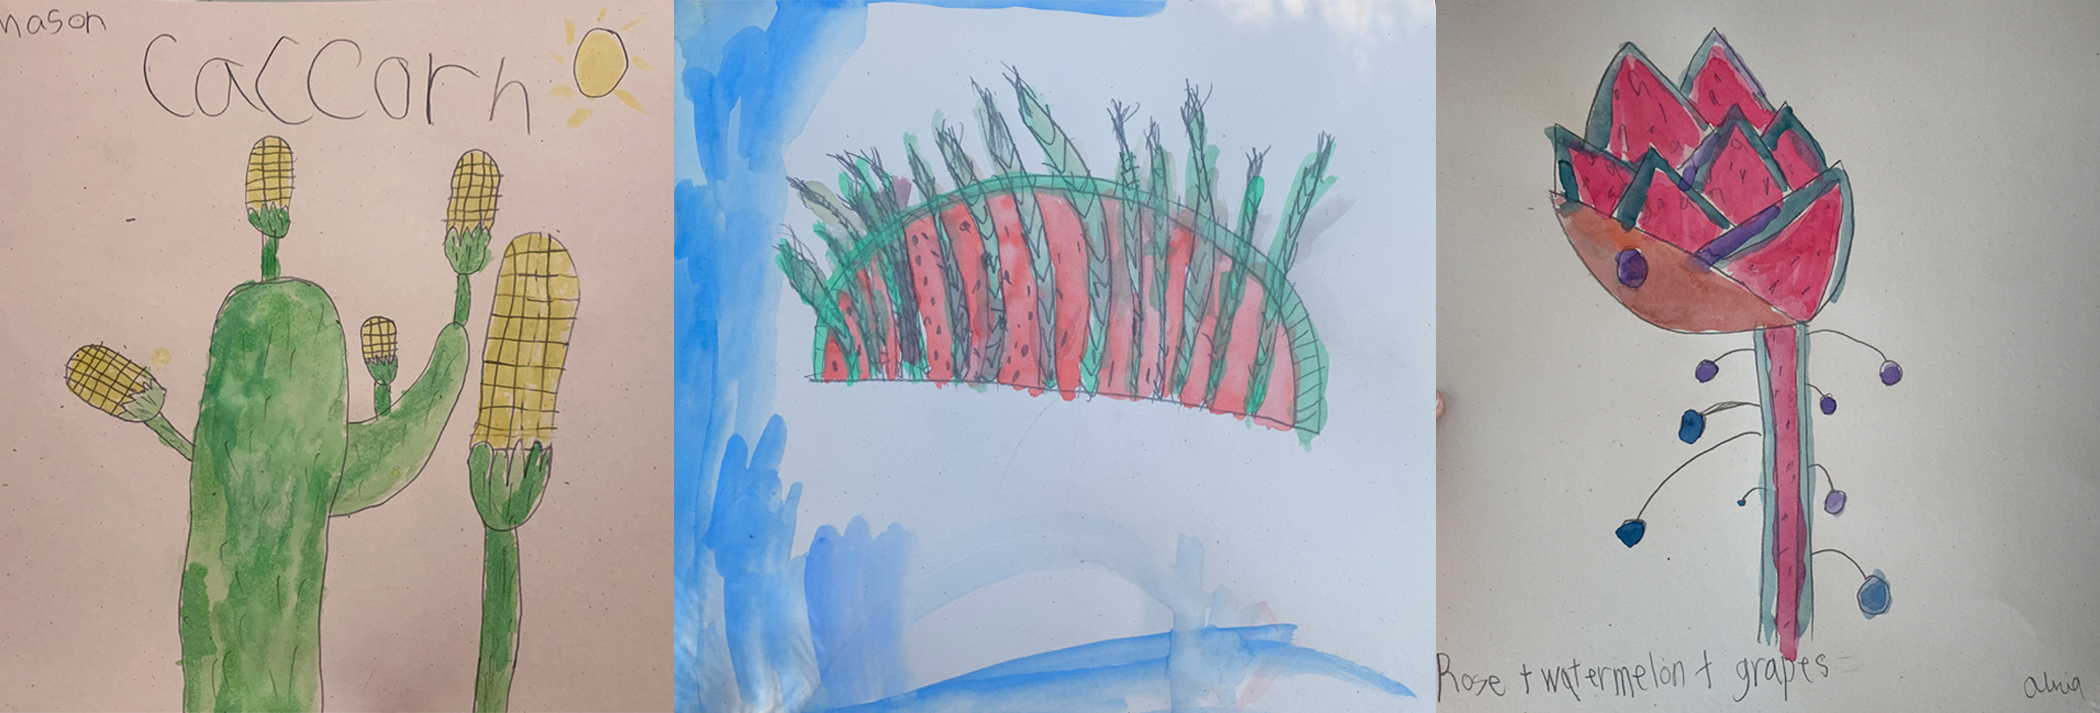 Watercolor creations inspired by Ginny Ruffner: Reforestation of the Imagination invented by children depict three distinct plant combinations, a "caccorn" (cactus and corn), watermelon and asparagus, and a rose, watermelon, and grapes.